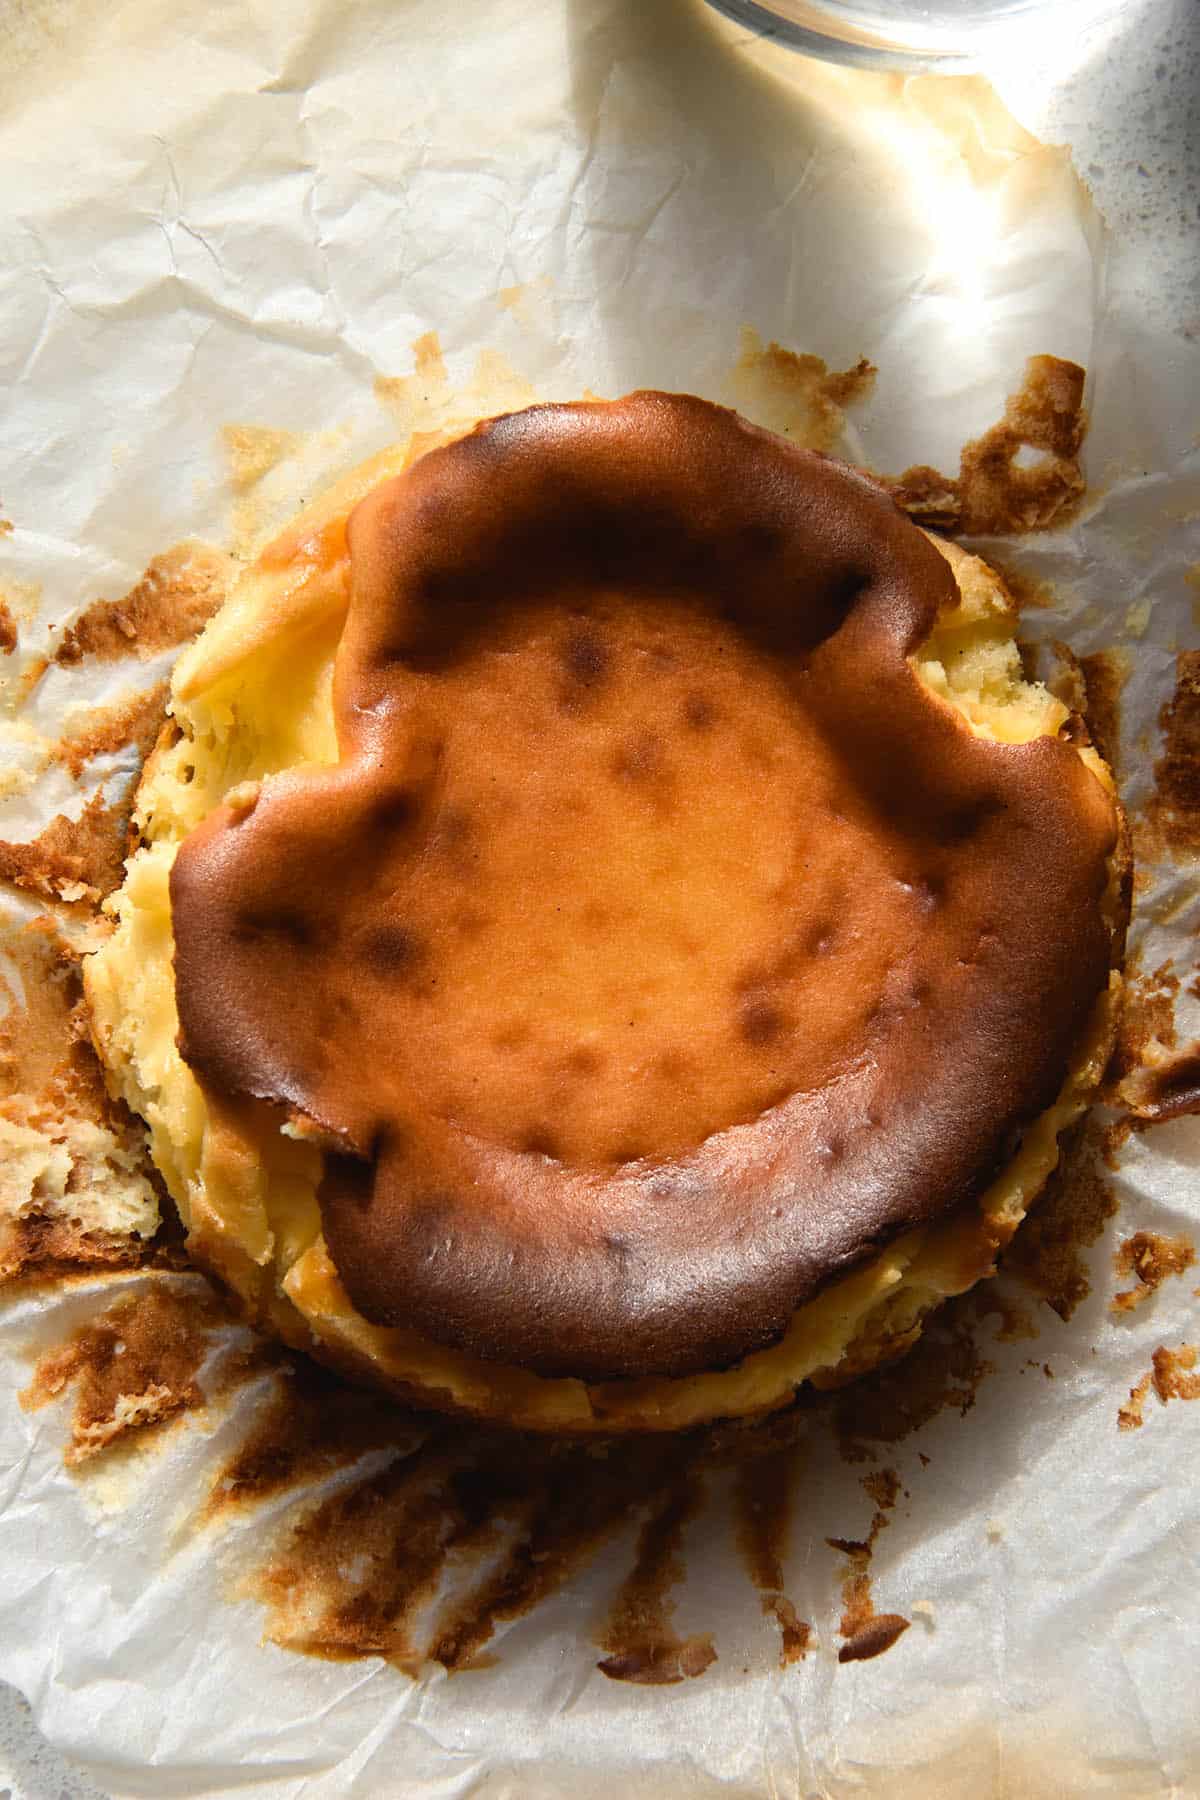 An aerial view of a mini Basque cheesecake. The top of the cheesecake is caramelised and the baking paper has been pulled away from the sides, forming the background of the image